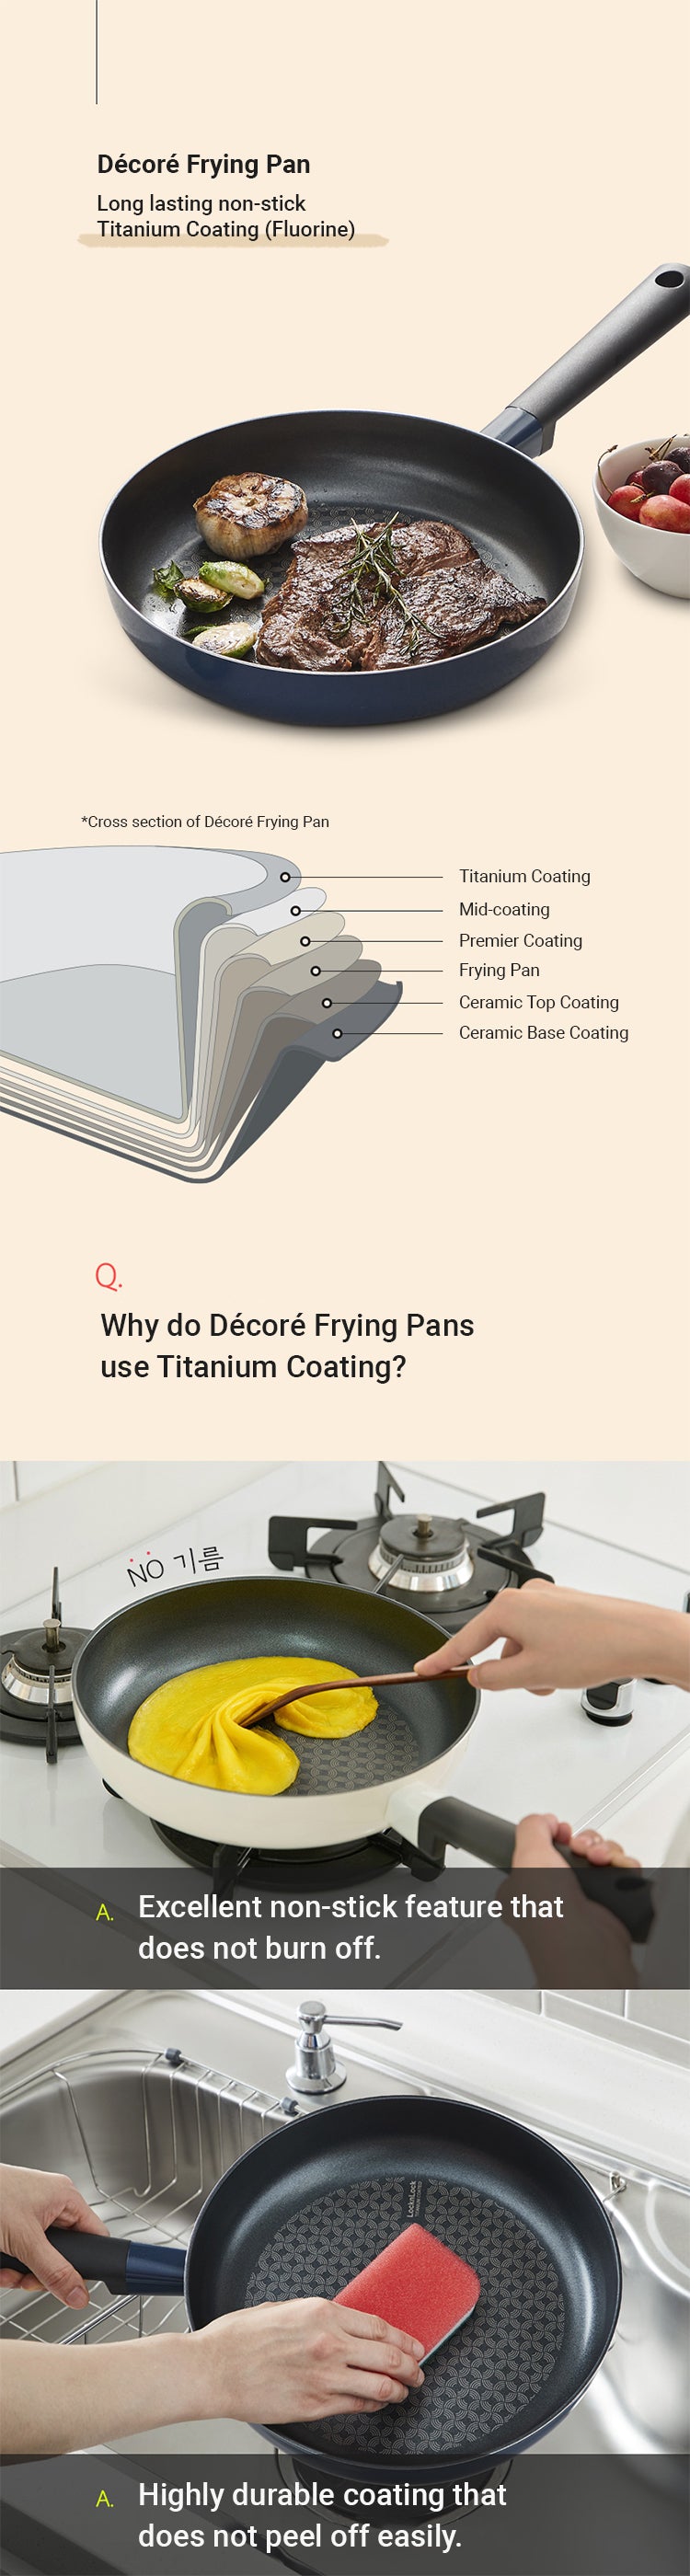 Decore frying pans have Titanium non-stick coating that makes it easier and healthier to fry.